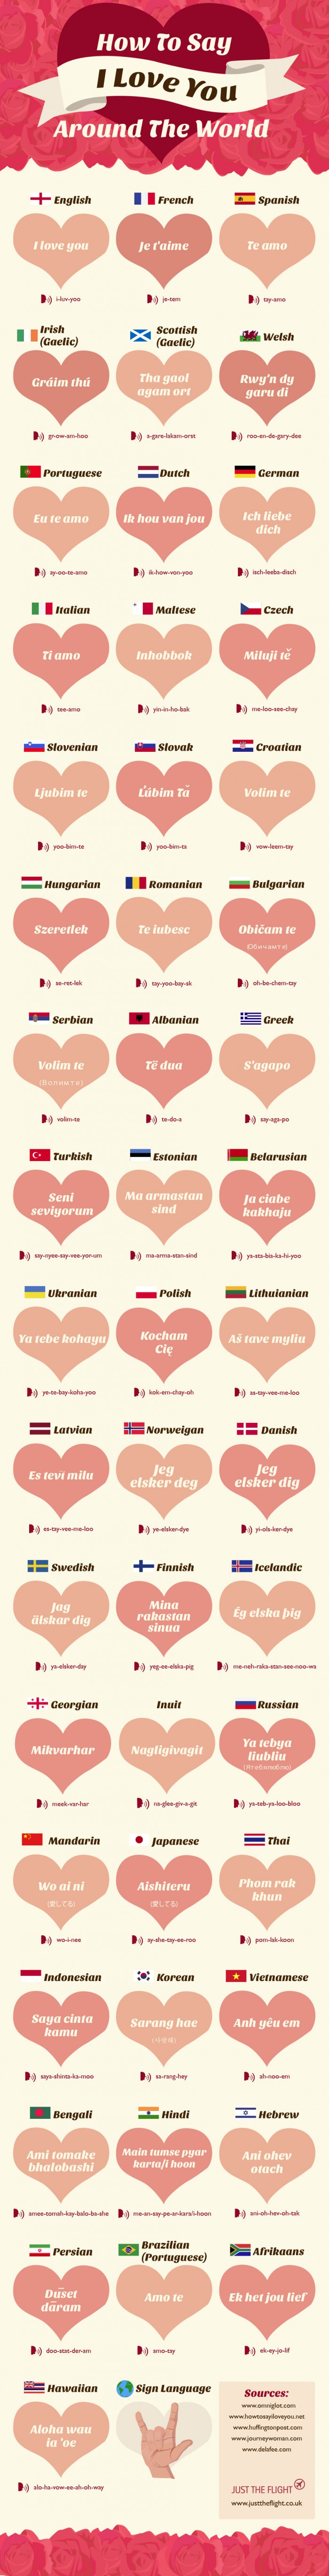 i-love-you infographic